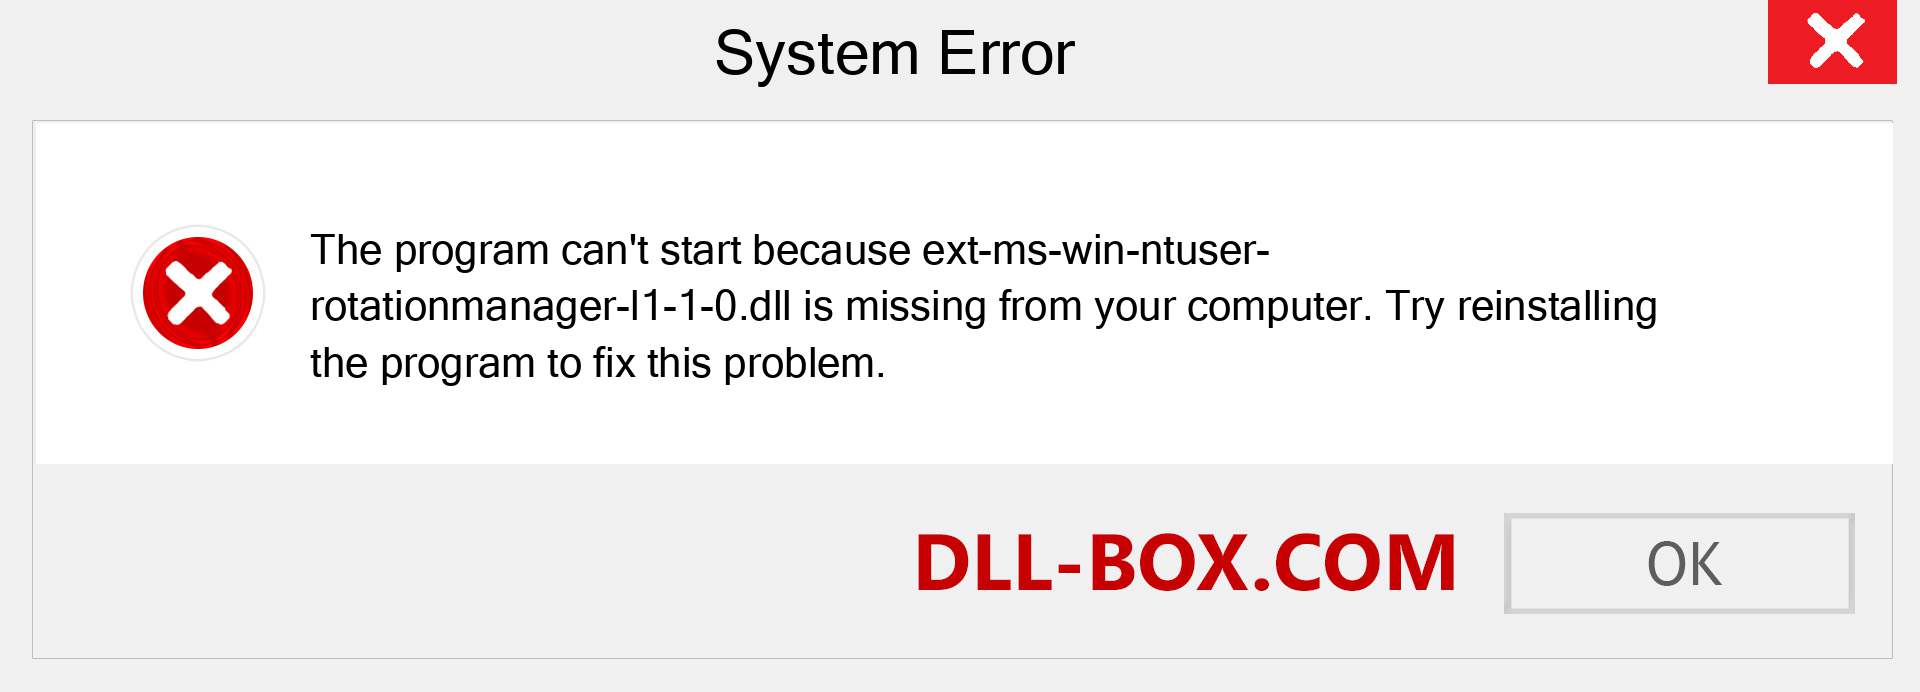  ext-ms-win-ntuser-rotationmanager-l1-1-0.dll file is missing?. Download for Windows 7, 8, 10 - Fix  ext-ms-win-ntuser-rotationmanager-l1-1-0 dll Missing Error on Windows, photos, images